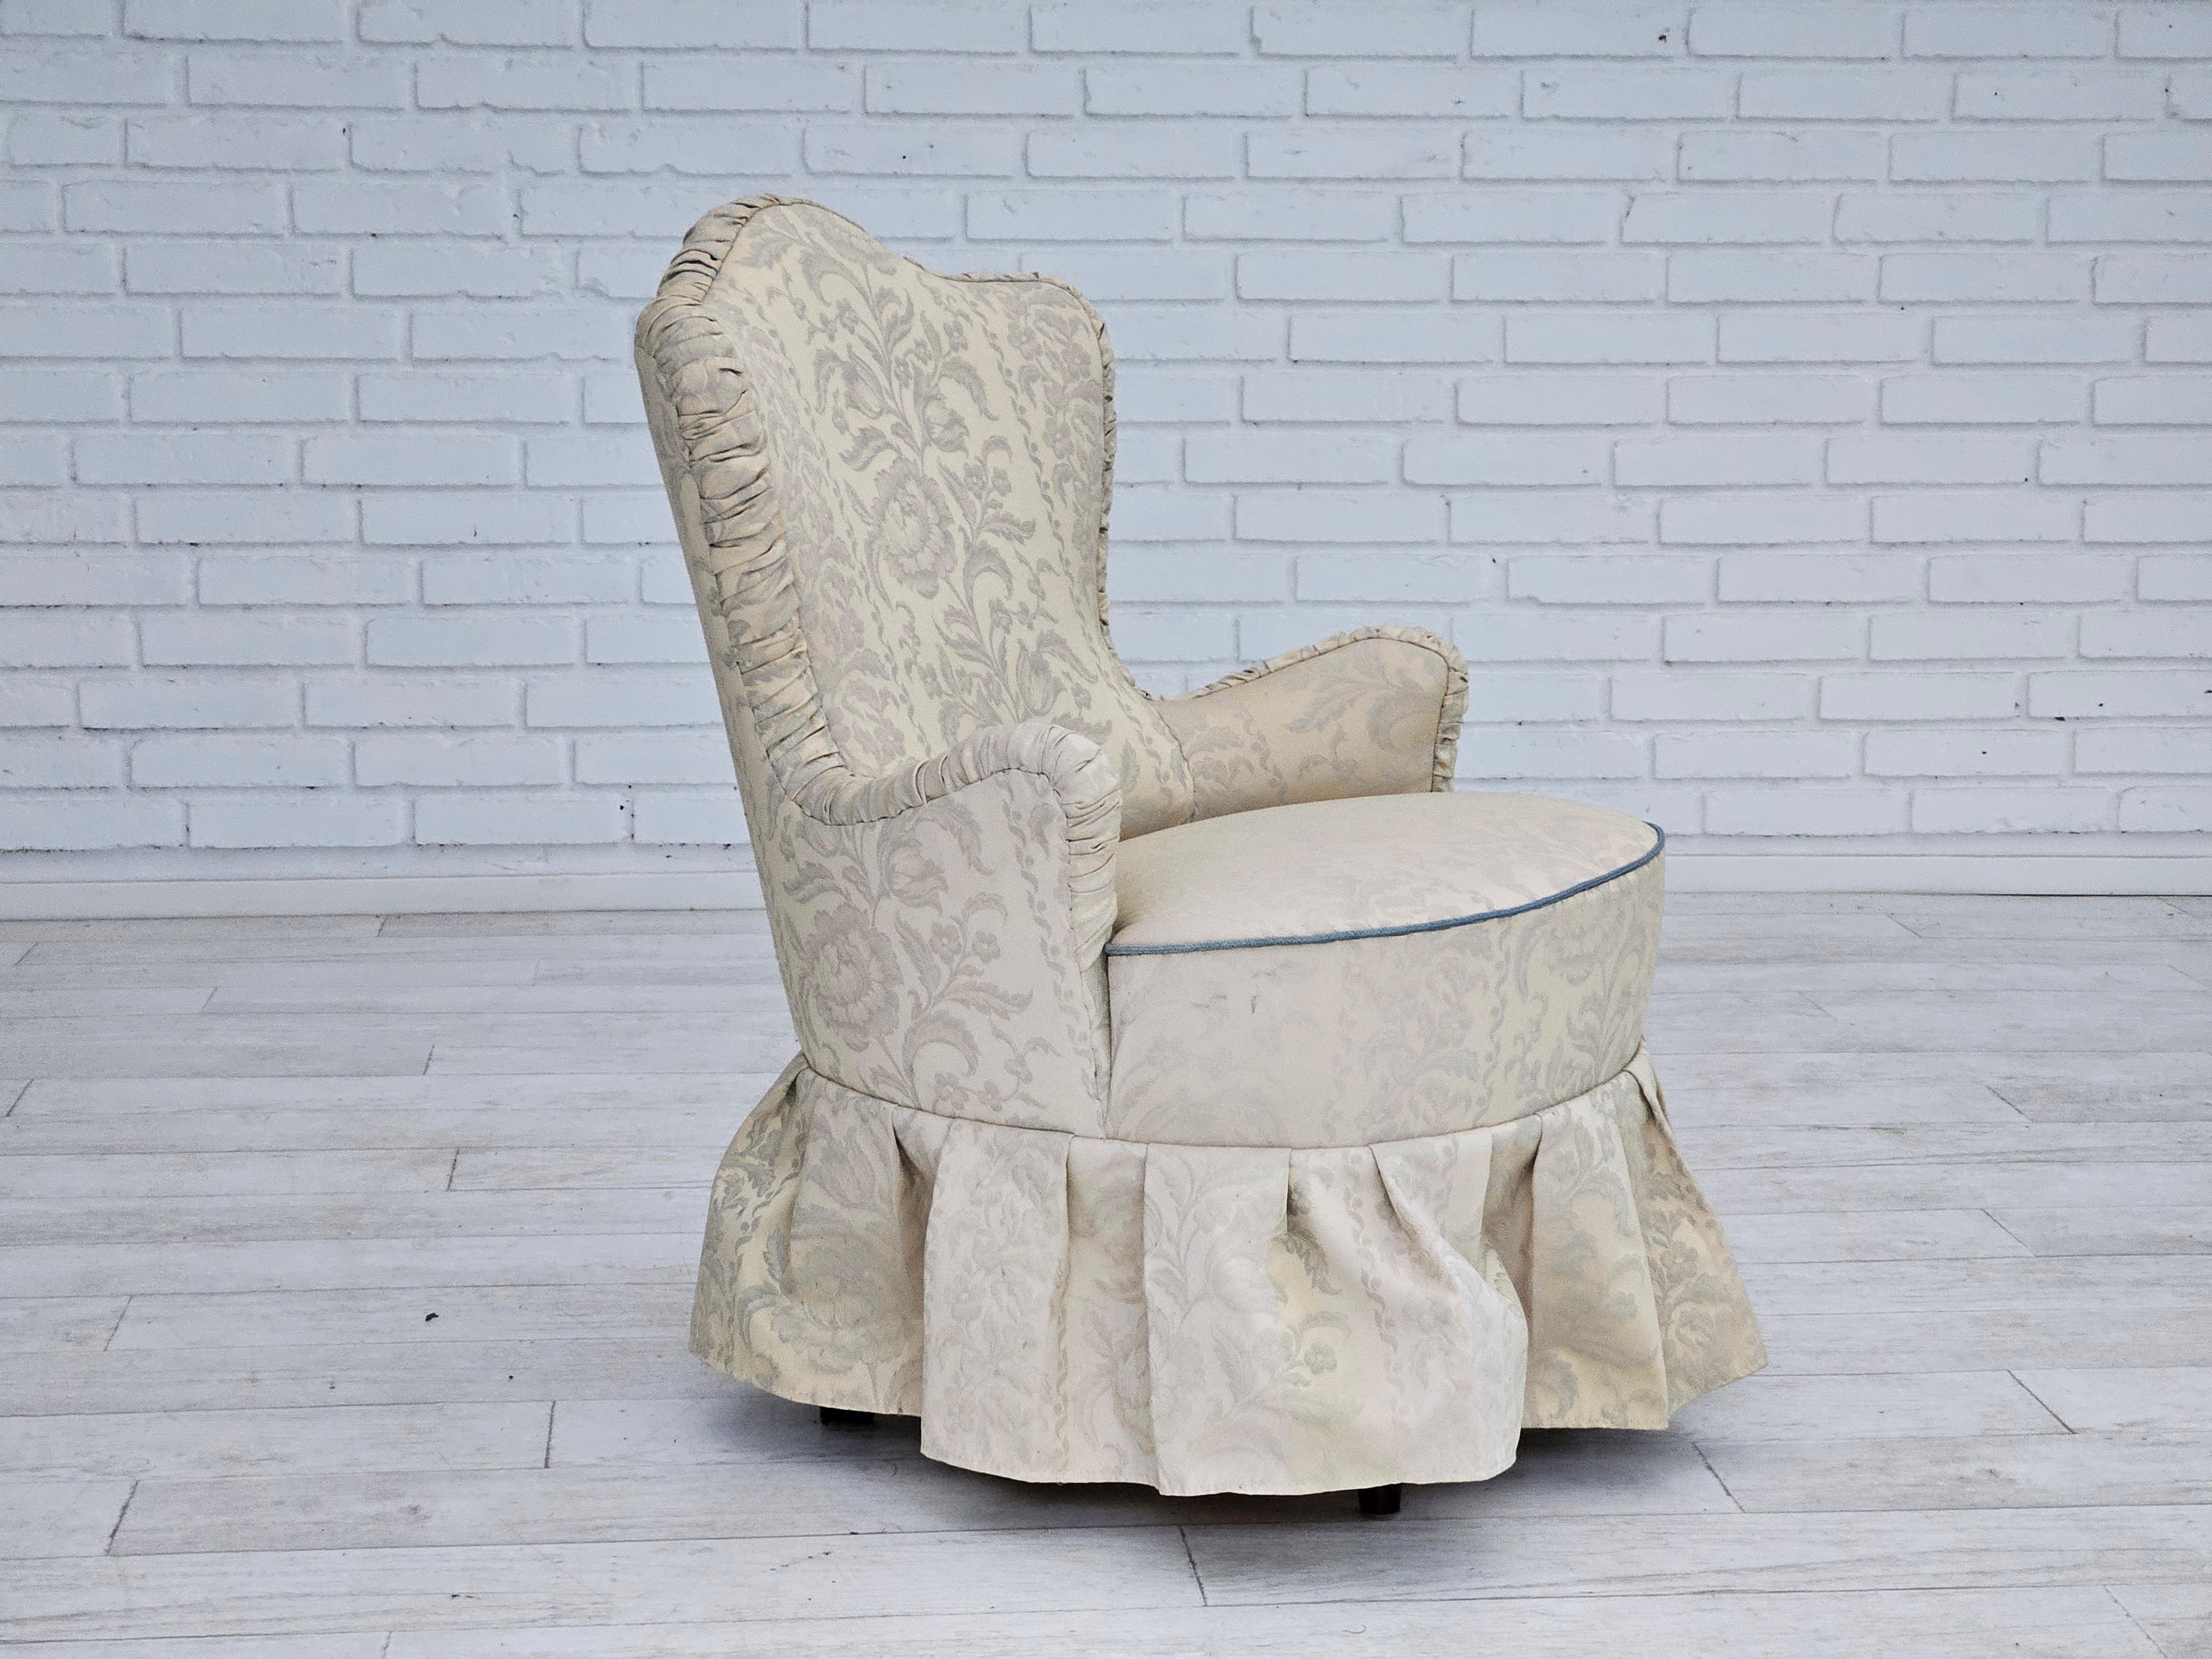 1950s, Danish reupholstered little armchair. Reupholstered in creamy white flowers fabric. Original springs in the seat are kept. Beech wood legs. Manufactured by Danish furniture manufacturer in about 1950.